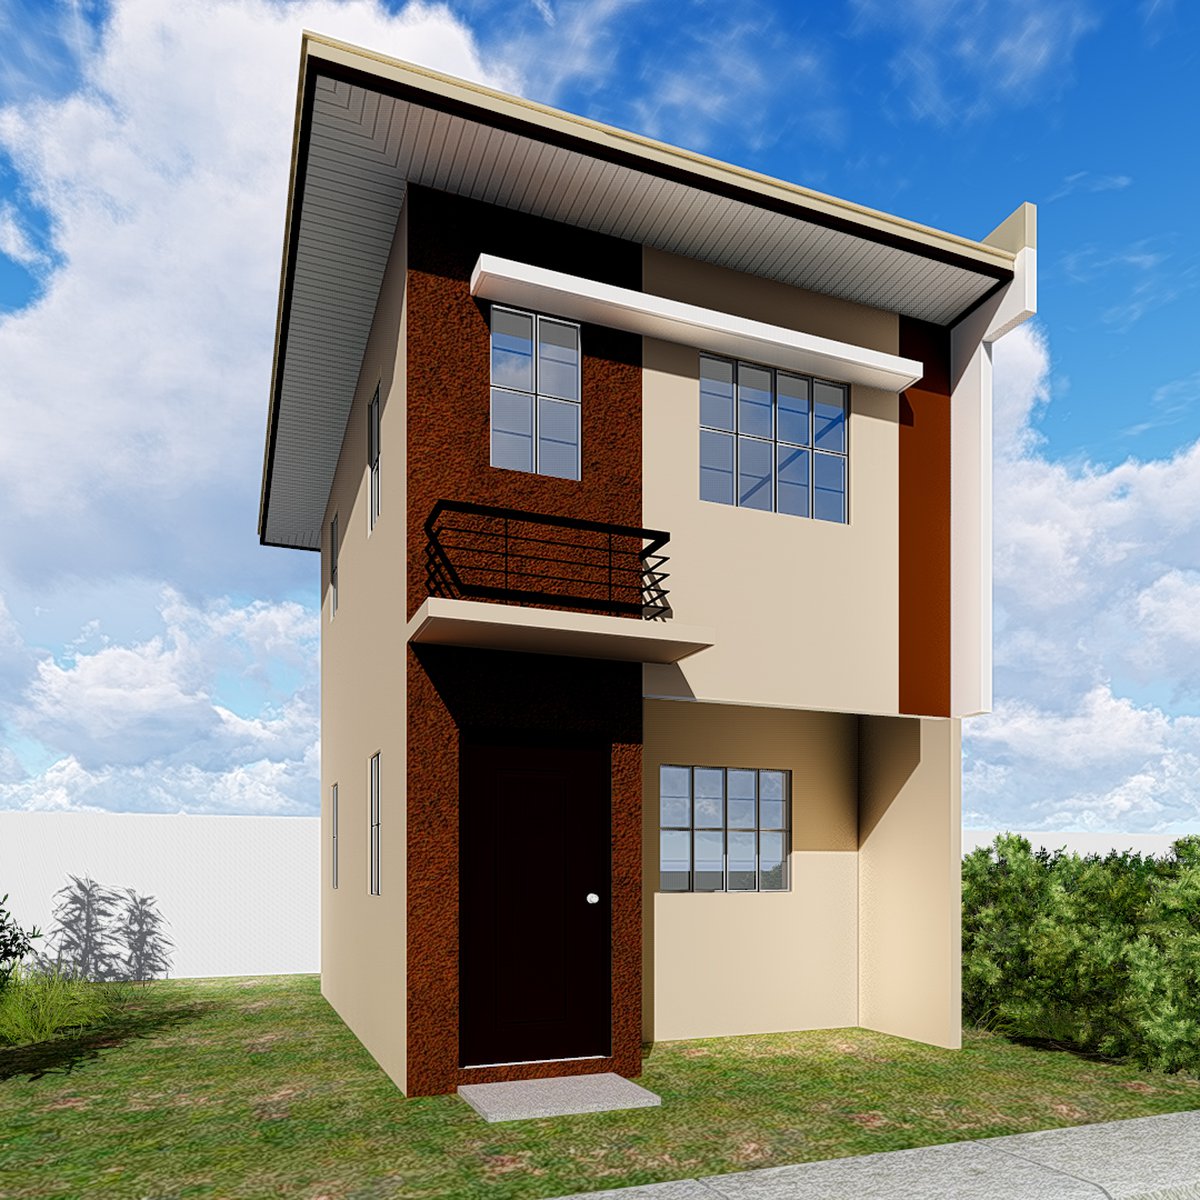 3-bedroom Single Detached House For Sale in Butuan Agusan del Norte